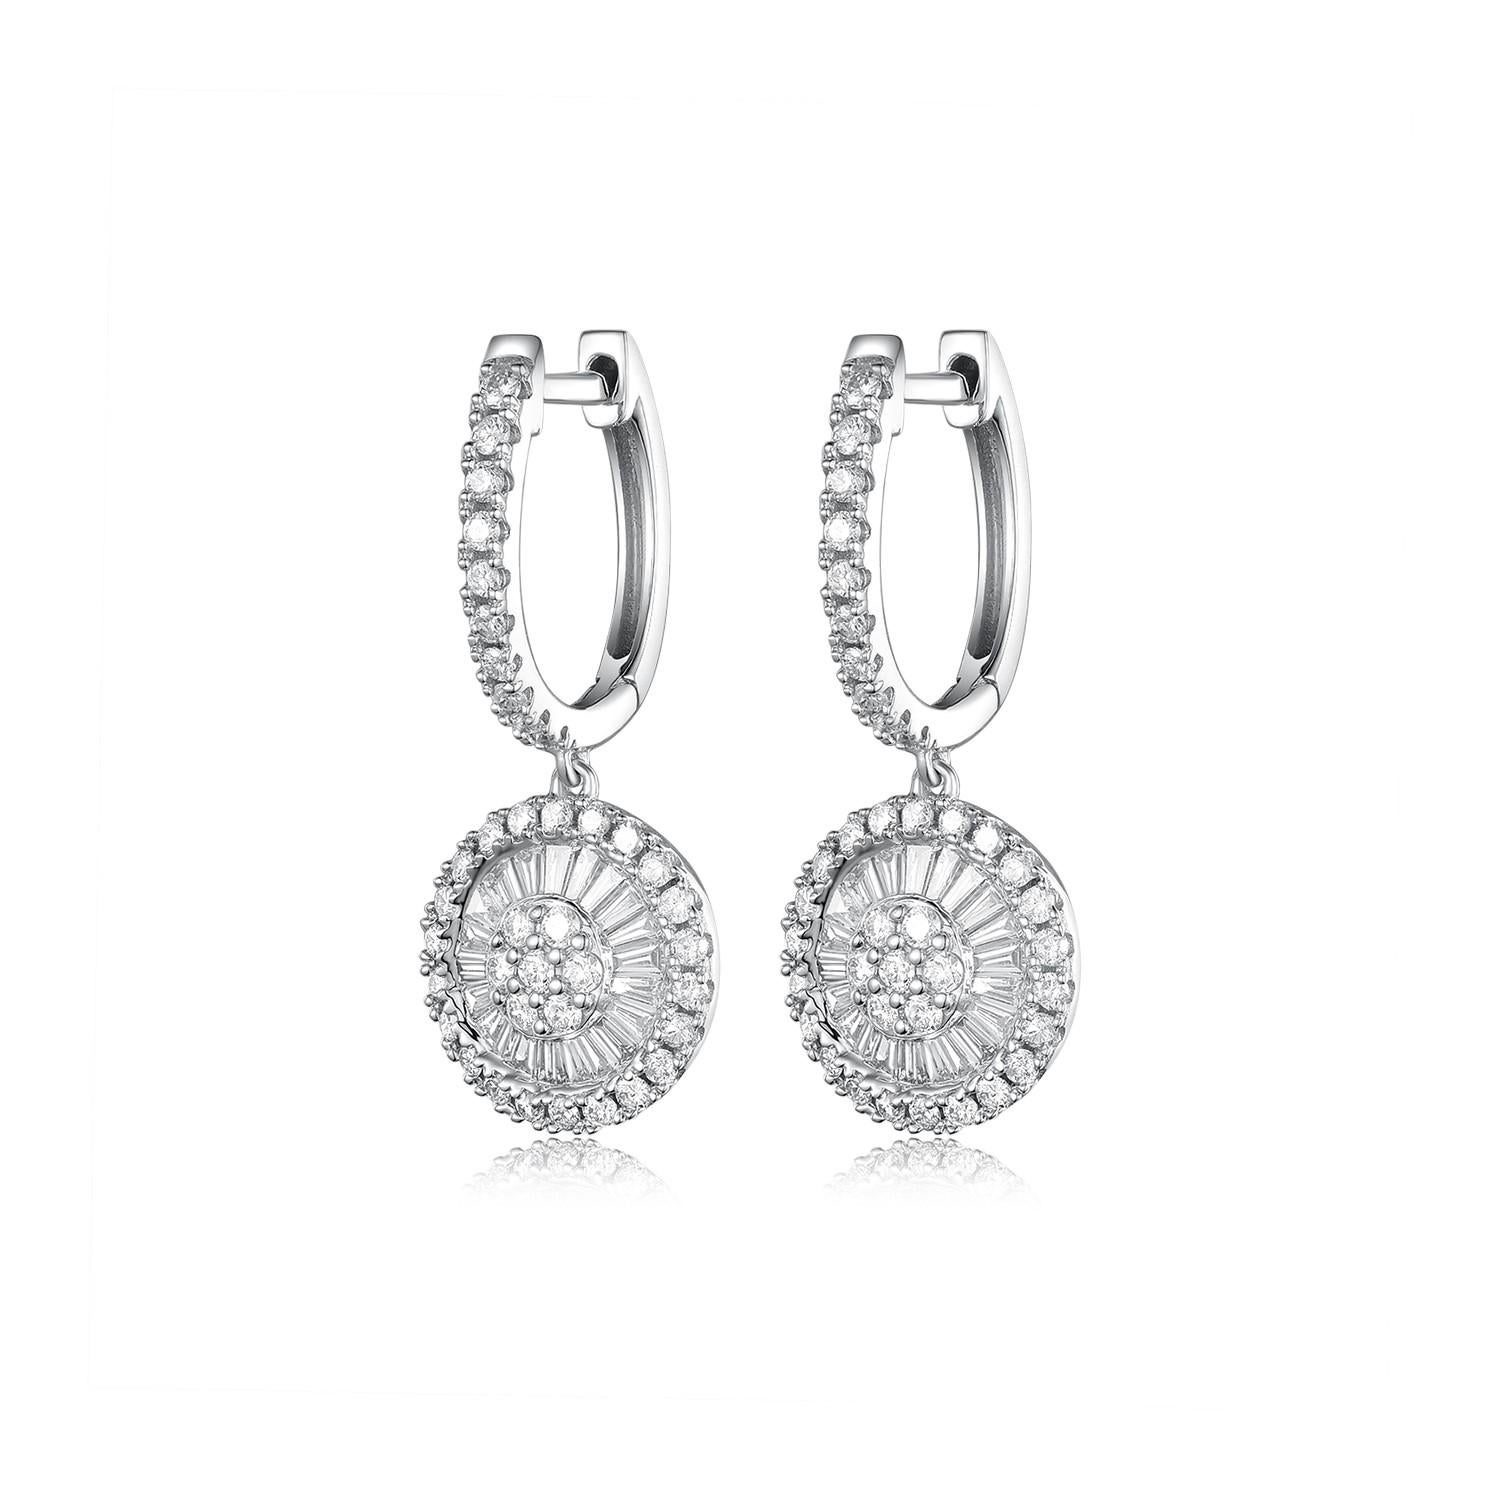 
These stunning drop earrings are a masterpiece of design, featuring 0.87 carats of diamonds set in 14 karat white gold. The earrings showcase a dazzling array of round brilliant-cut diamonds arranged in a captivating circular pattern. The central